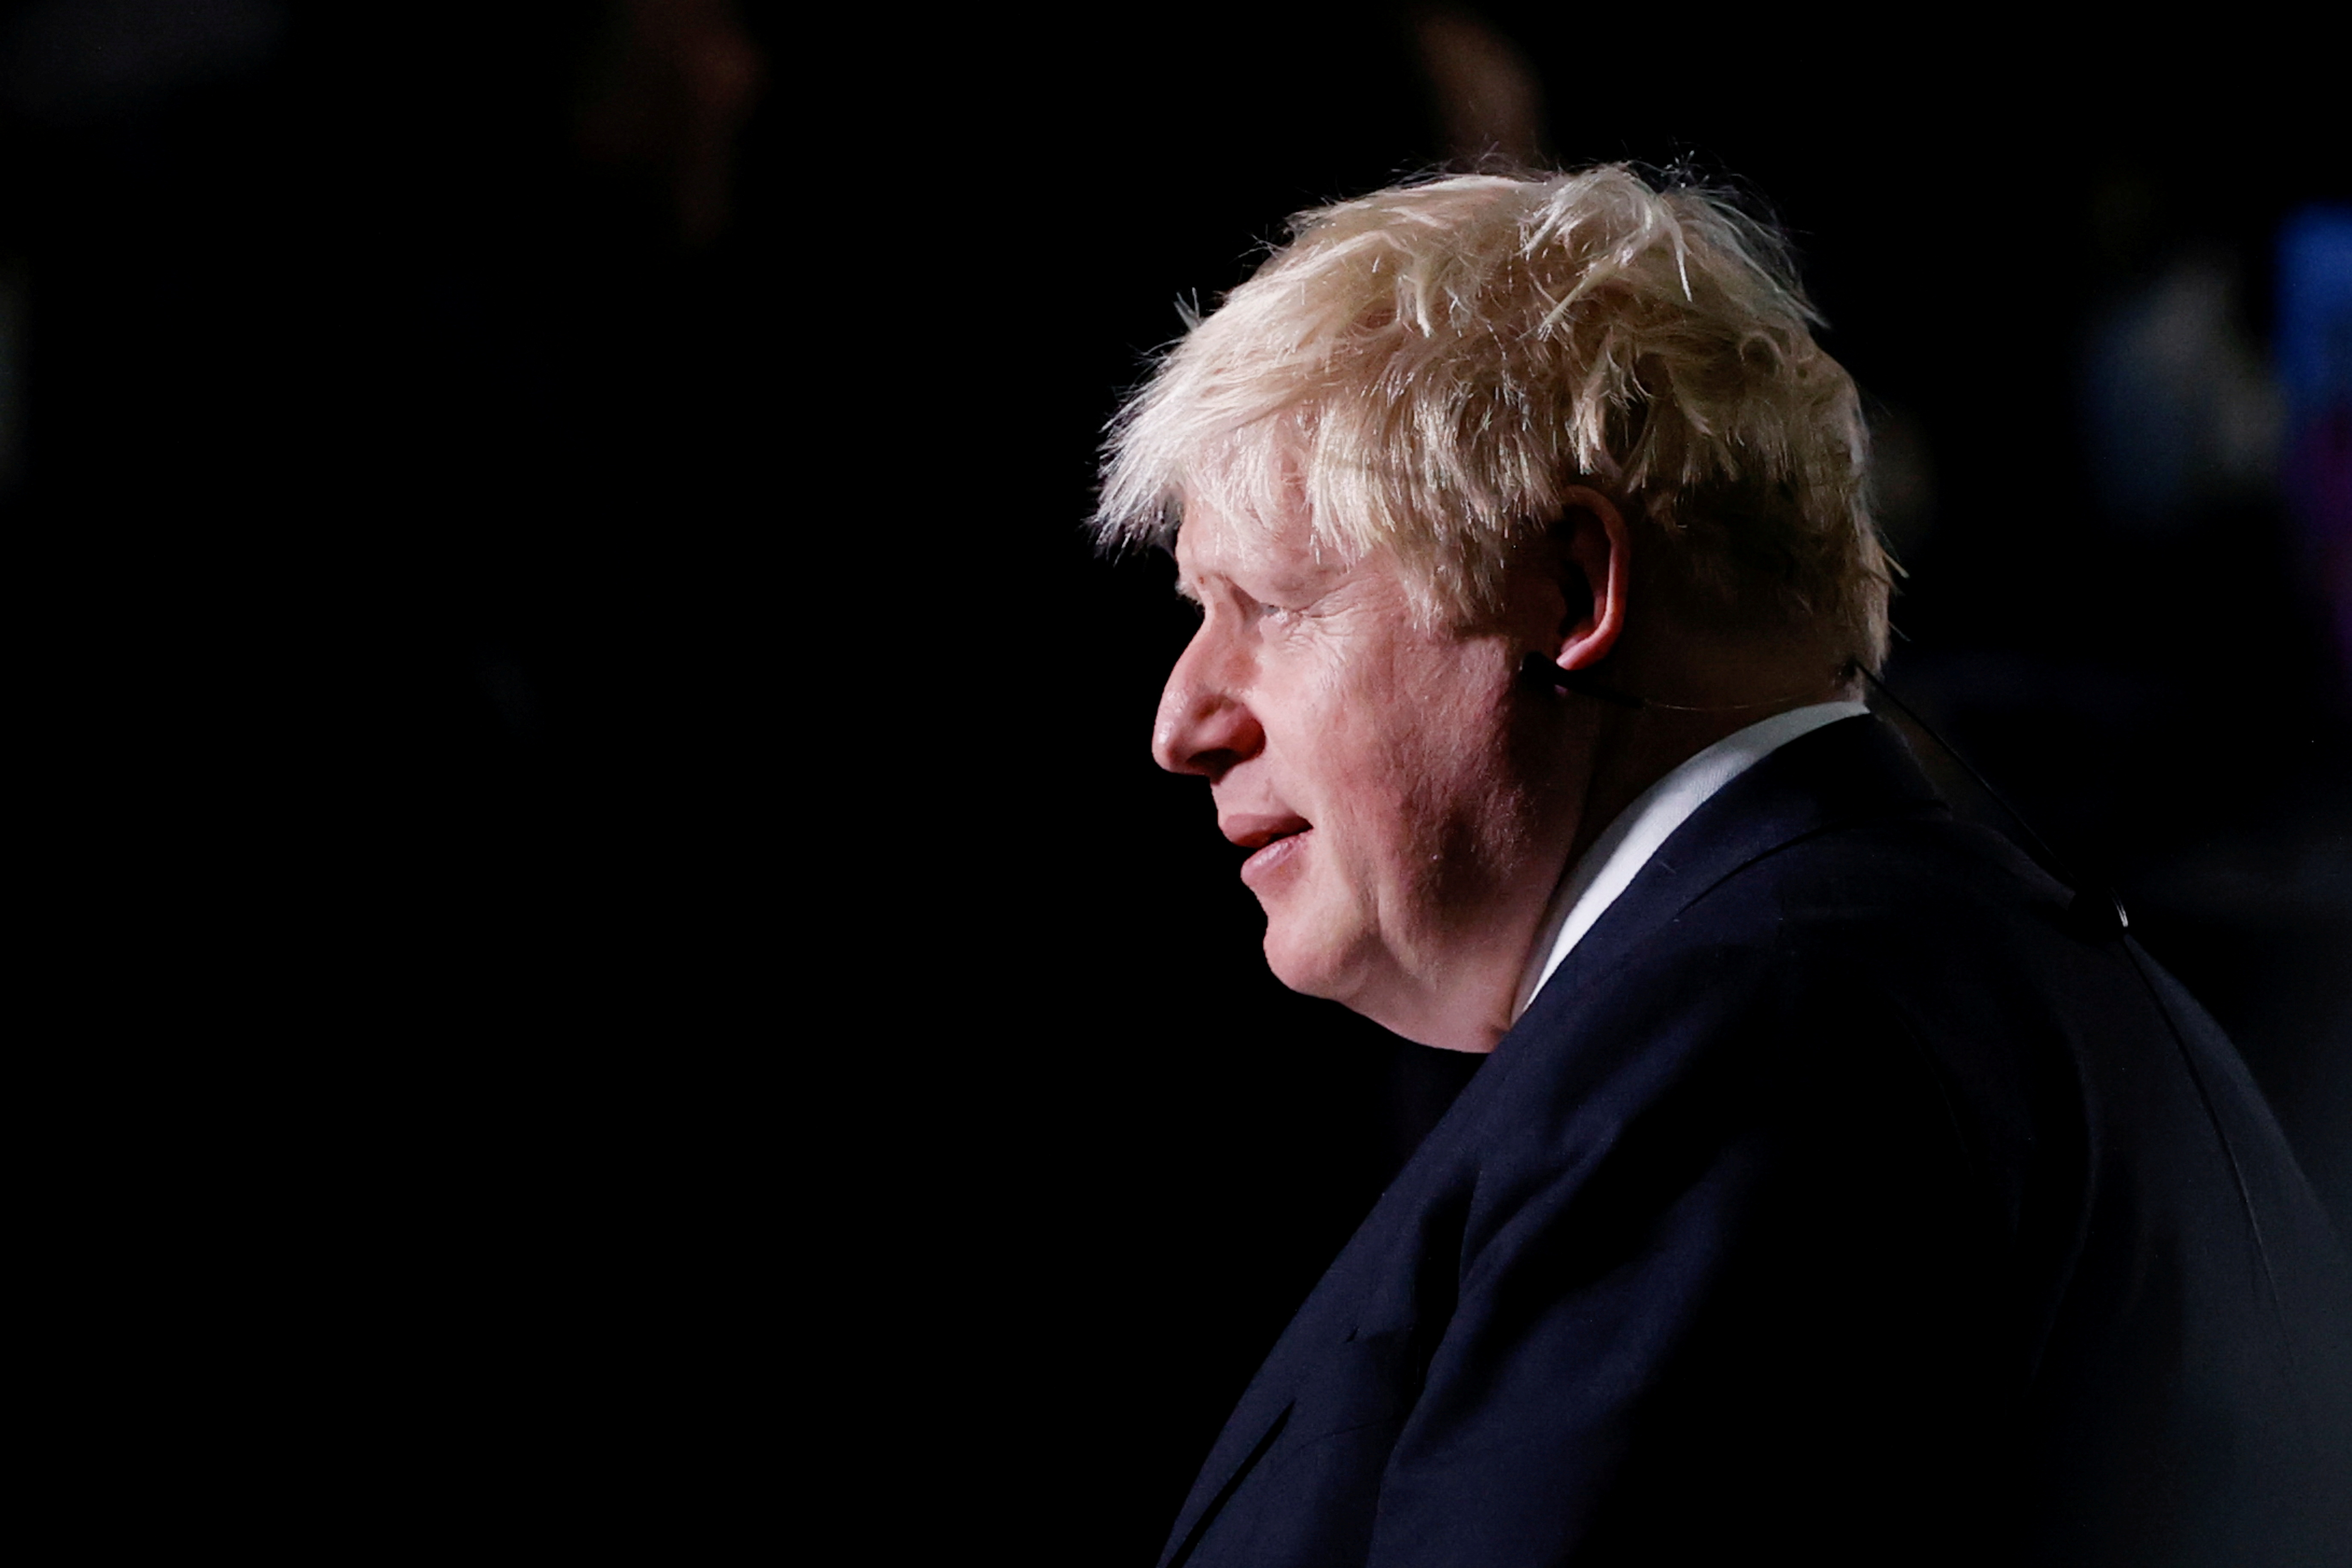 Britain's Prime Minister Boris Johnson takes part in media interviews during the annual Conservative Party conference, in Manchester, Britain, October 5, 2021. REUTERS/Phil Noble/File Photo